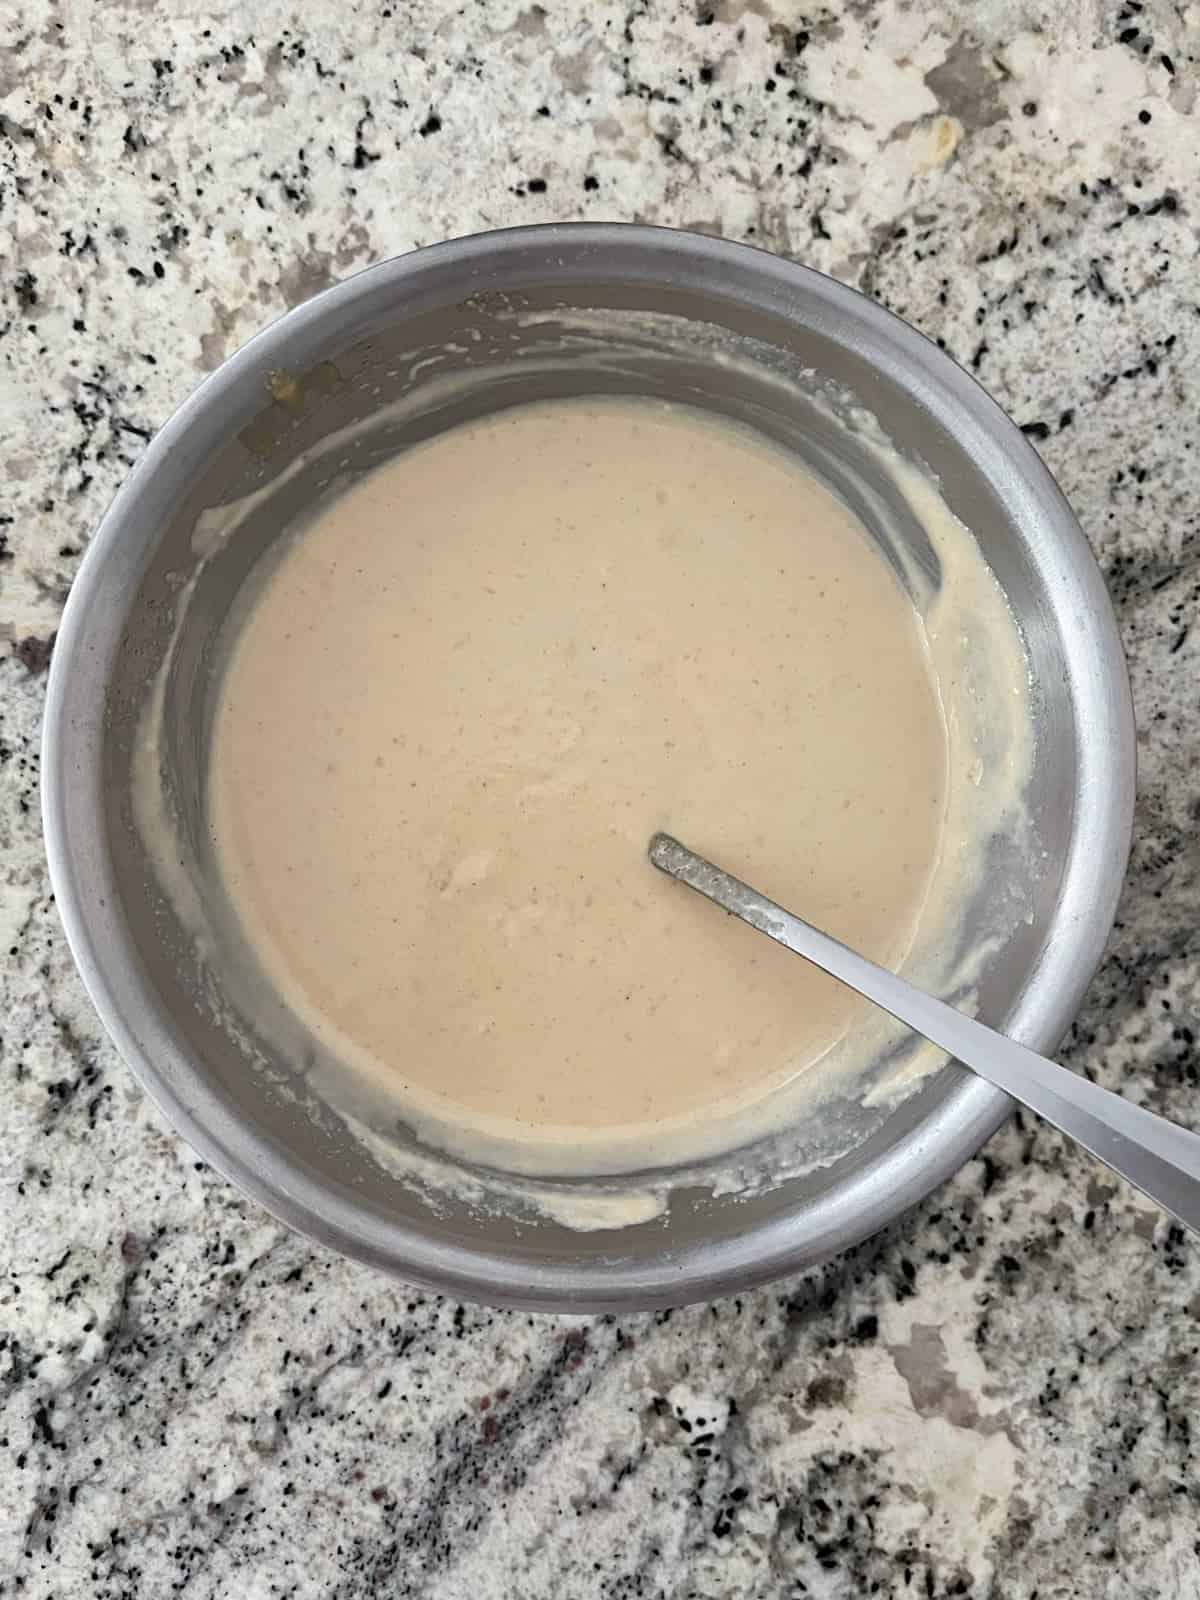 Mixing tahini dressing in stainless mixing bowl with spoon.